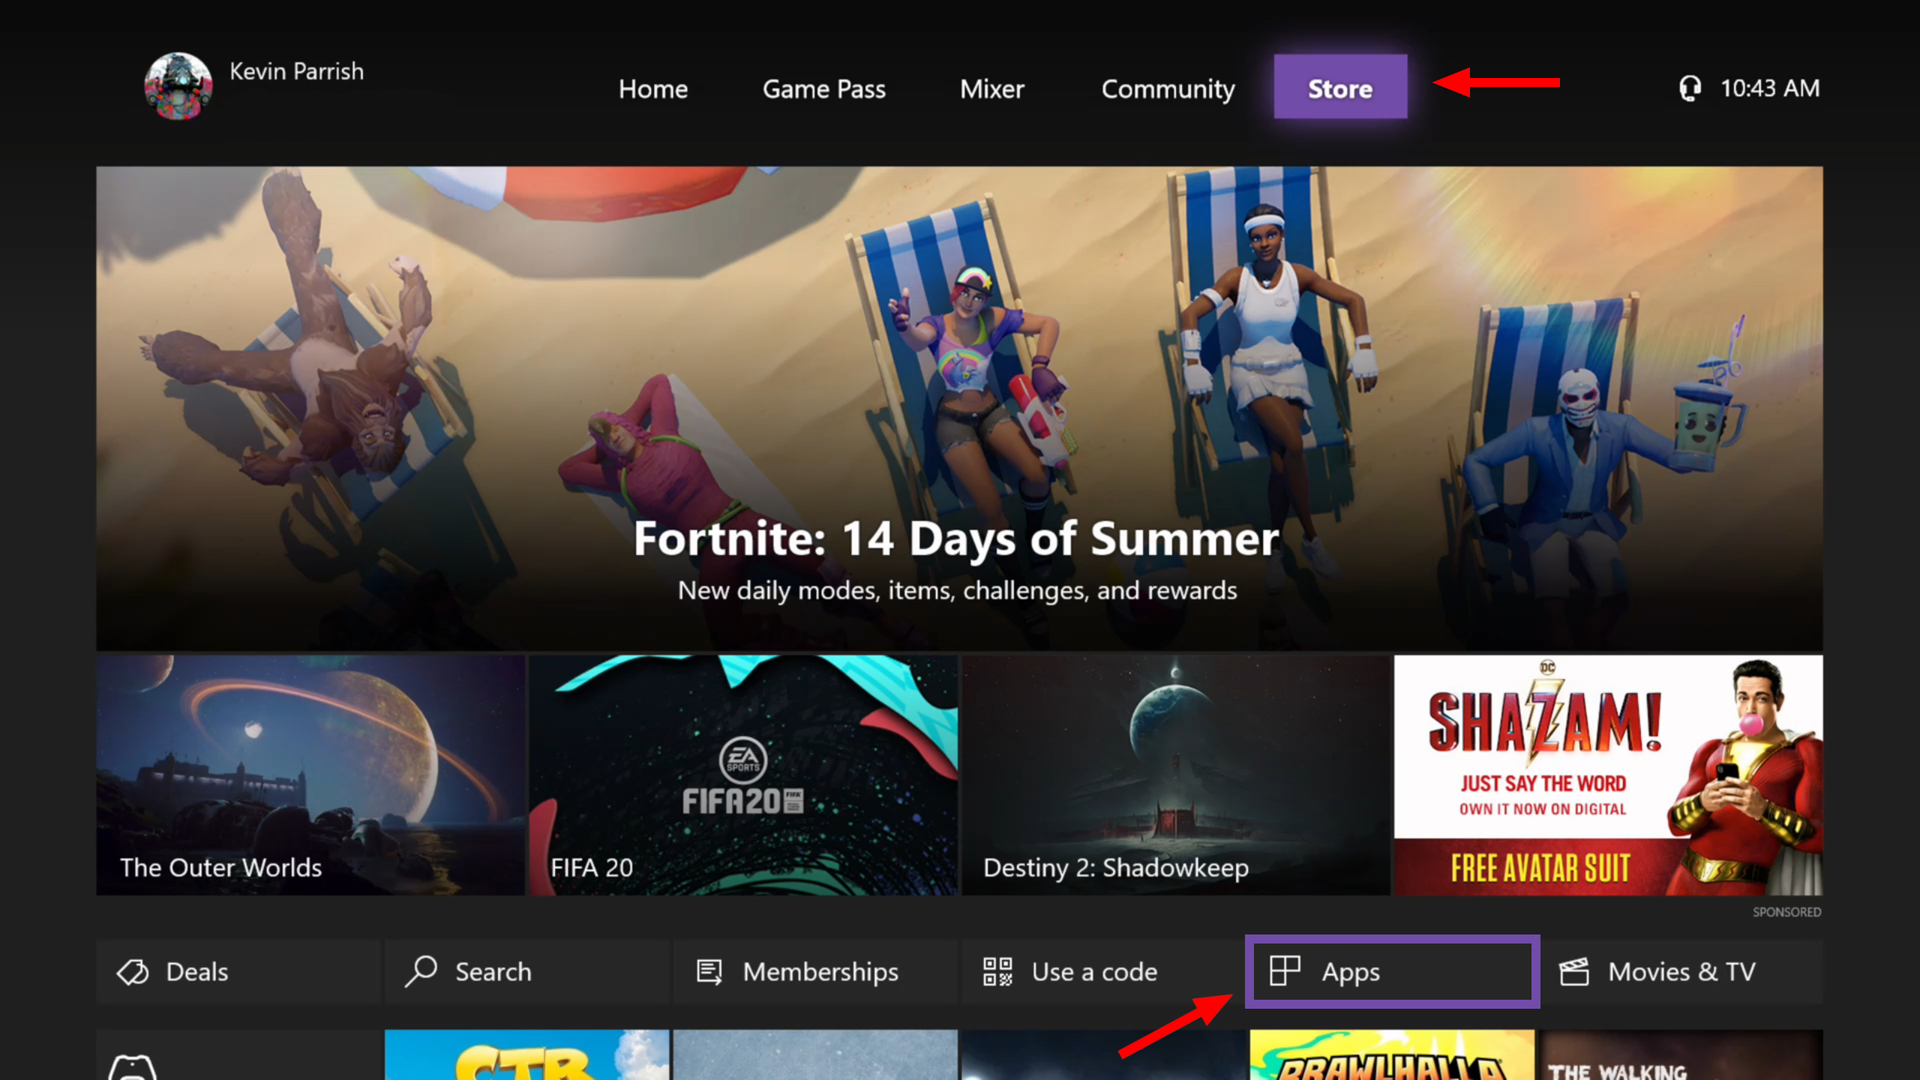 Netflix on Xbox One: Find Apps Page